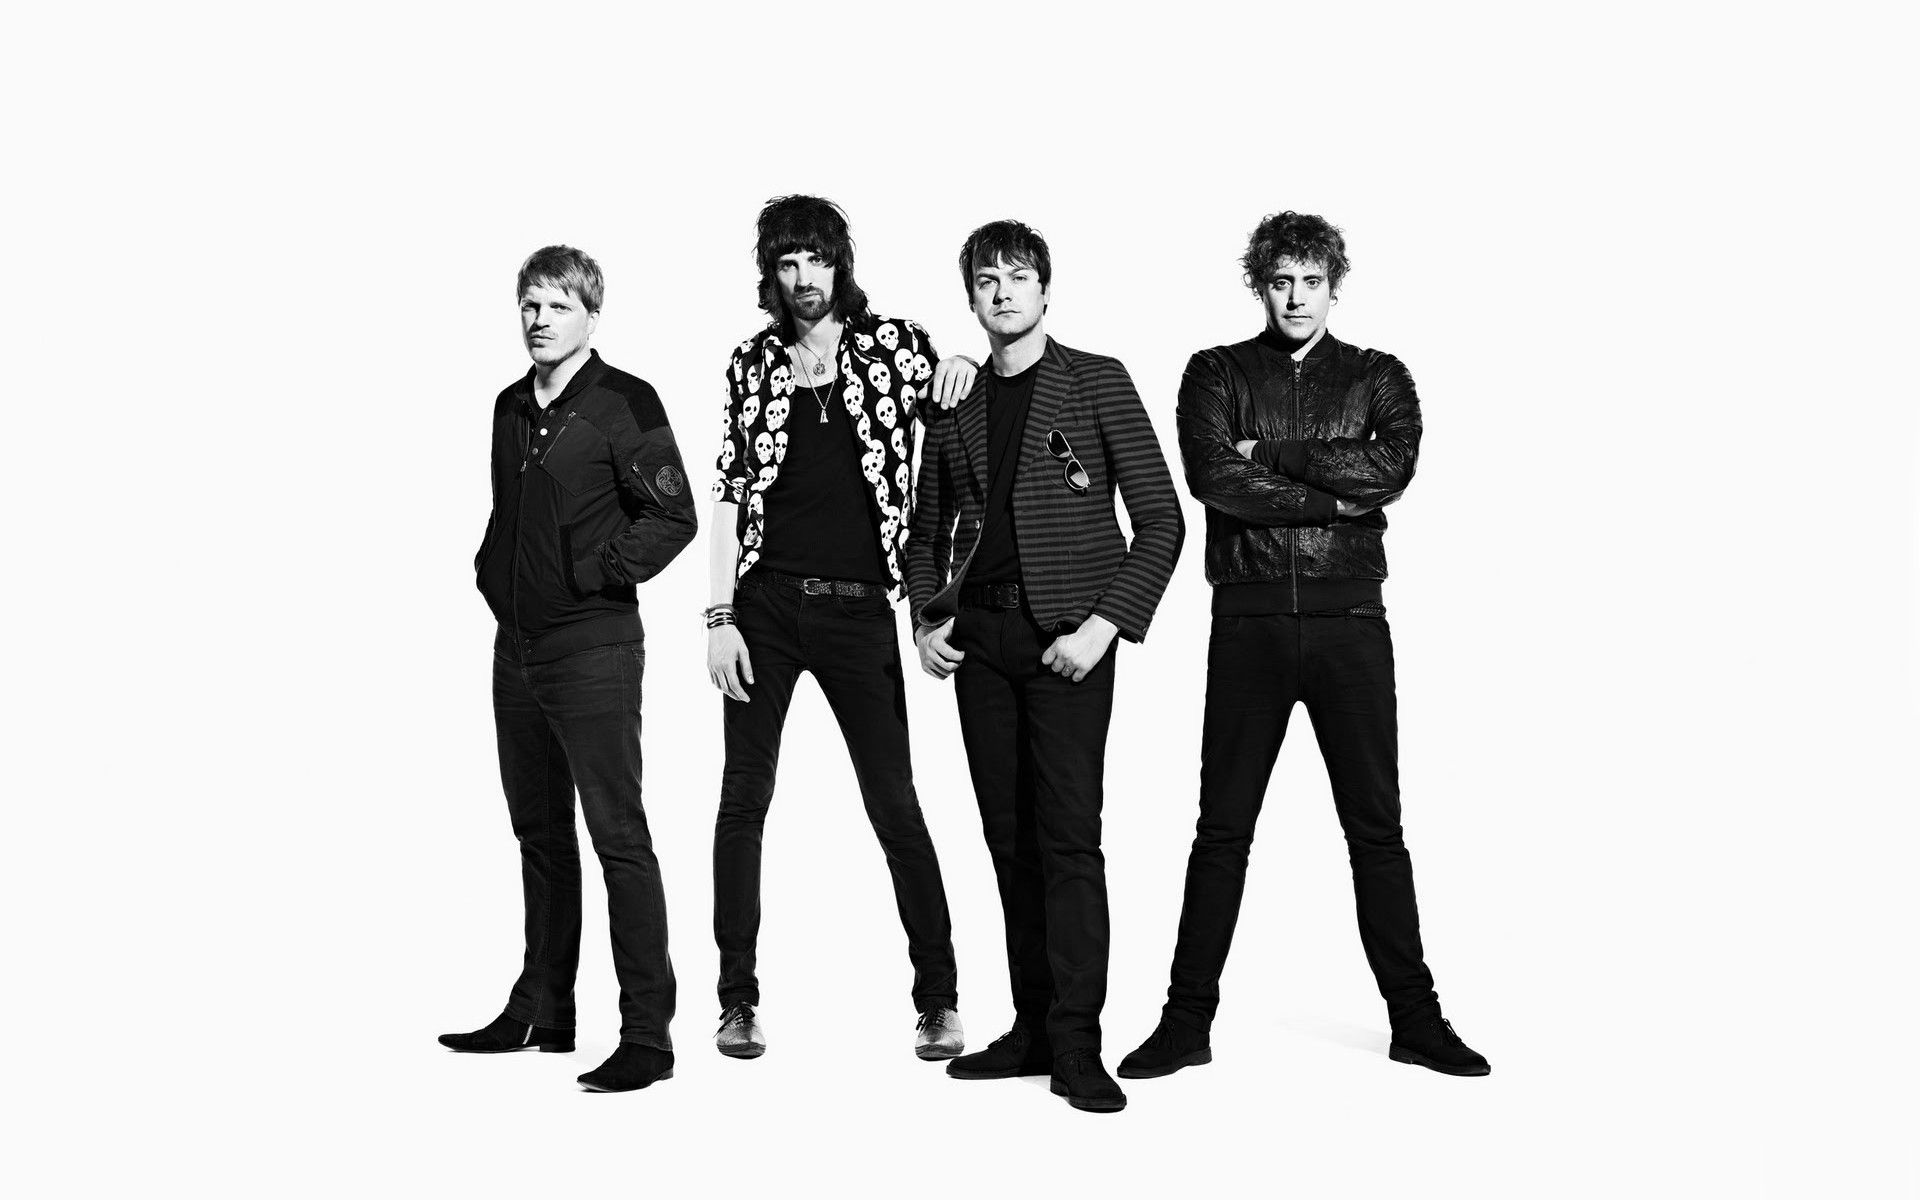 men, Grayscale, British, Music, Bands, White, Background, Kasabian, Tom, Meighan Wallpaper HD / Desktop and Mobile Background